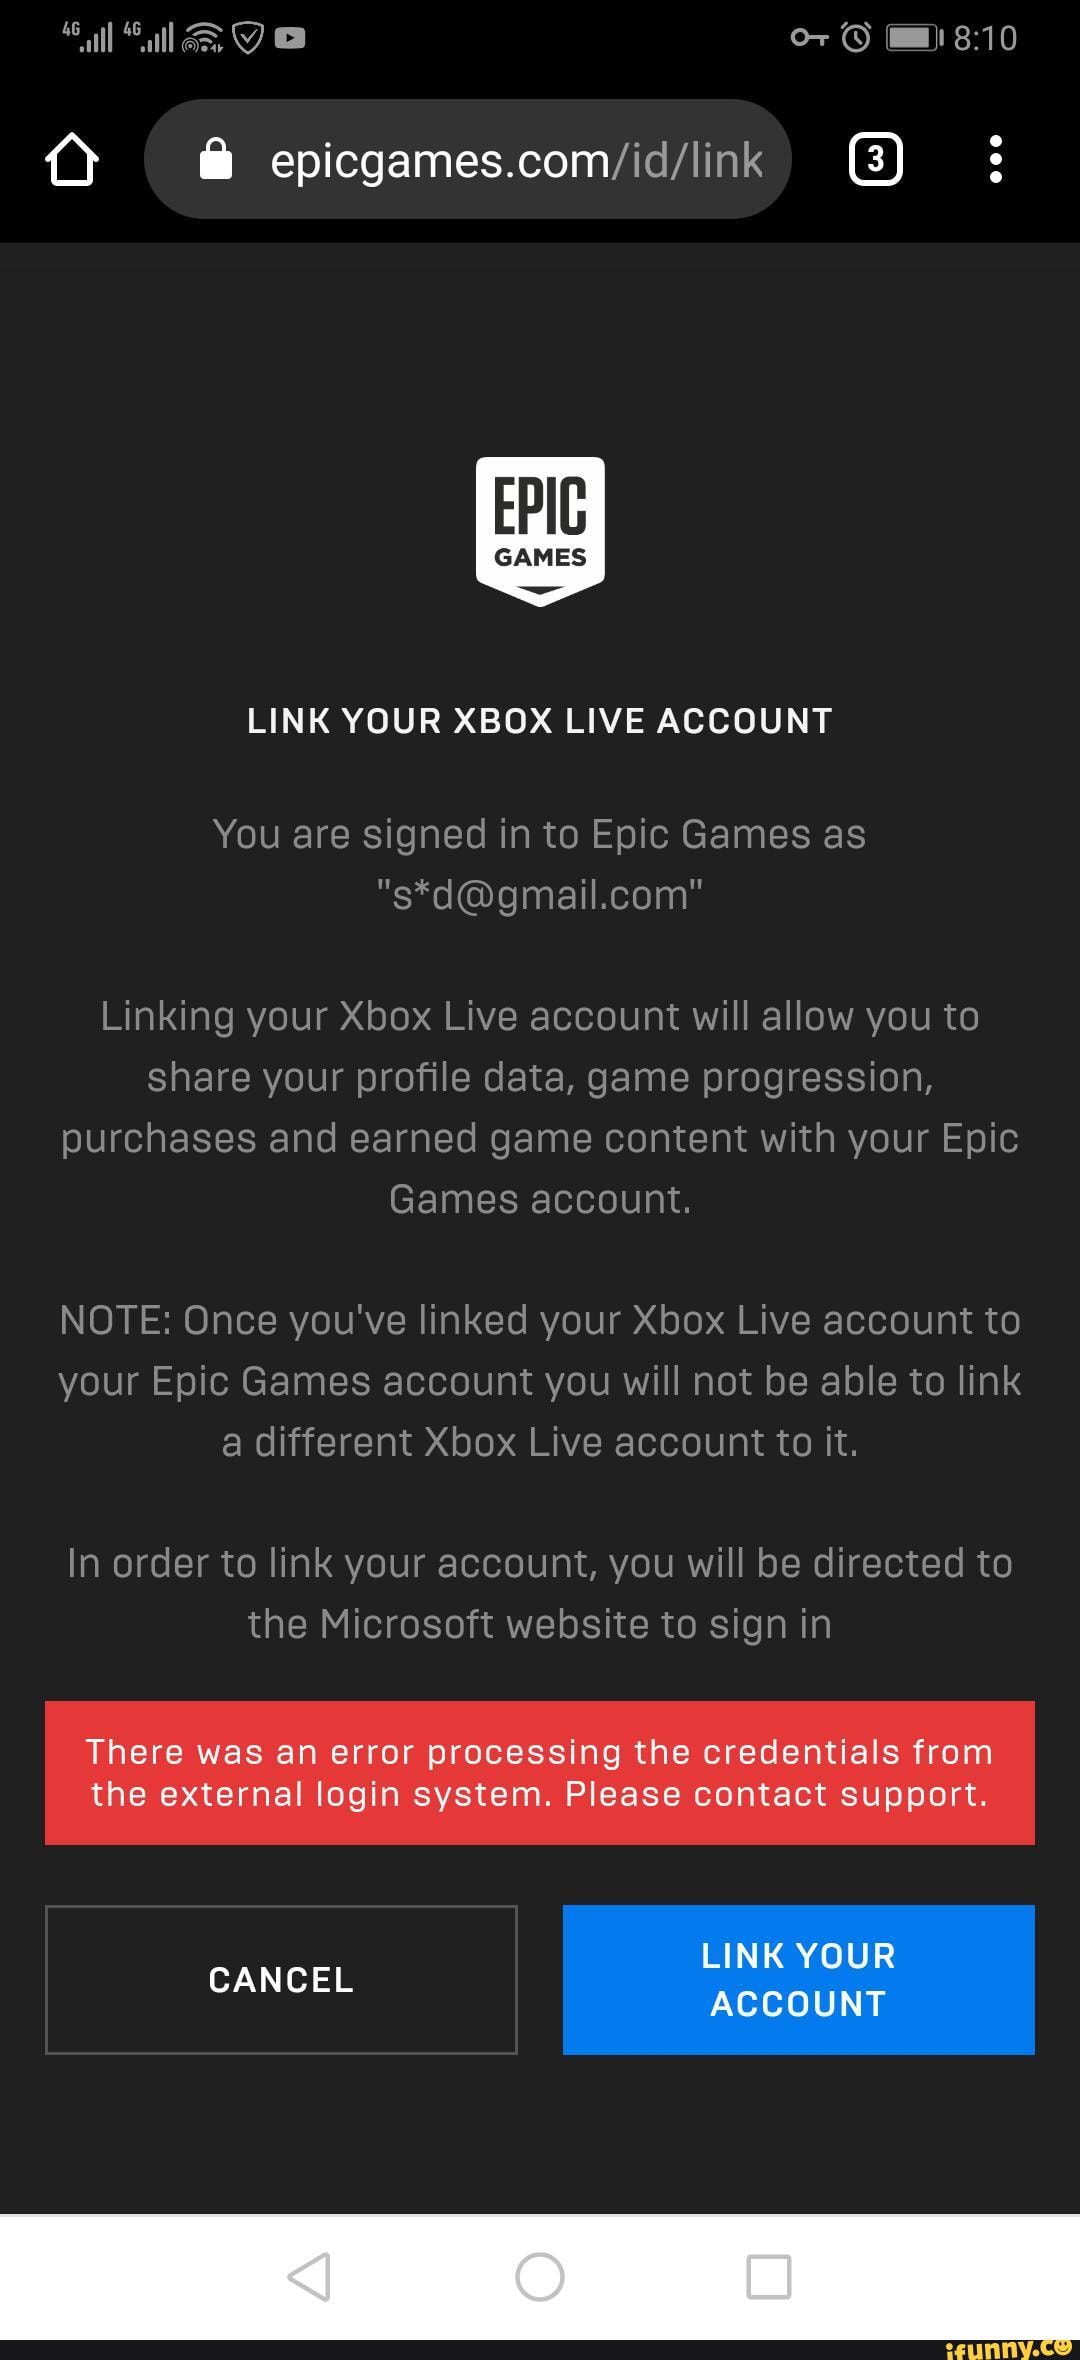 O I Epicgames Com Id Iink 6 Link Your Xbox Live Account You Are Signed In To Epic Games As S D Gmail Com Linking Your Xbox Live Account Will Allow You To Share Your Proﬁle Data Game